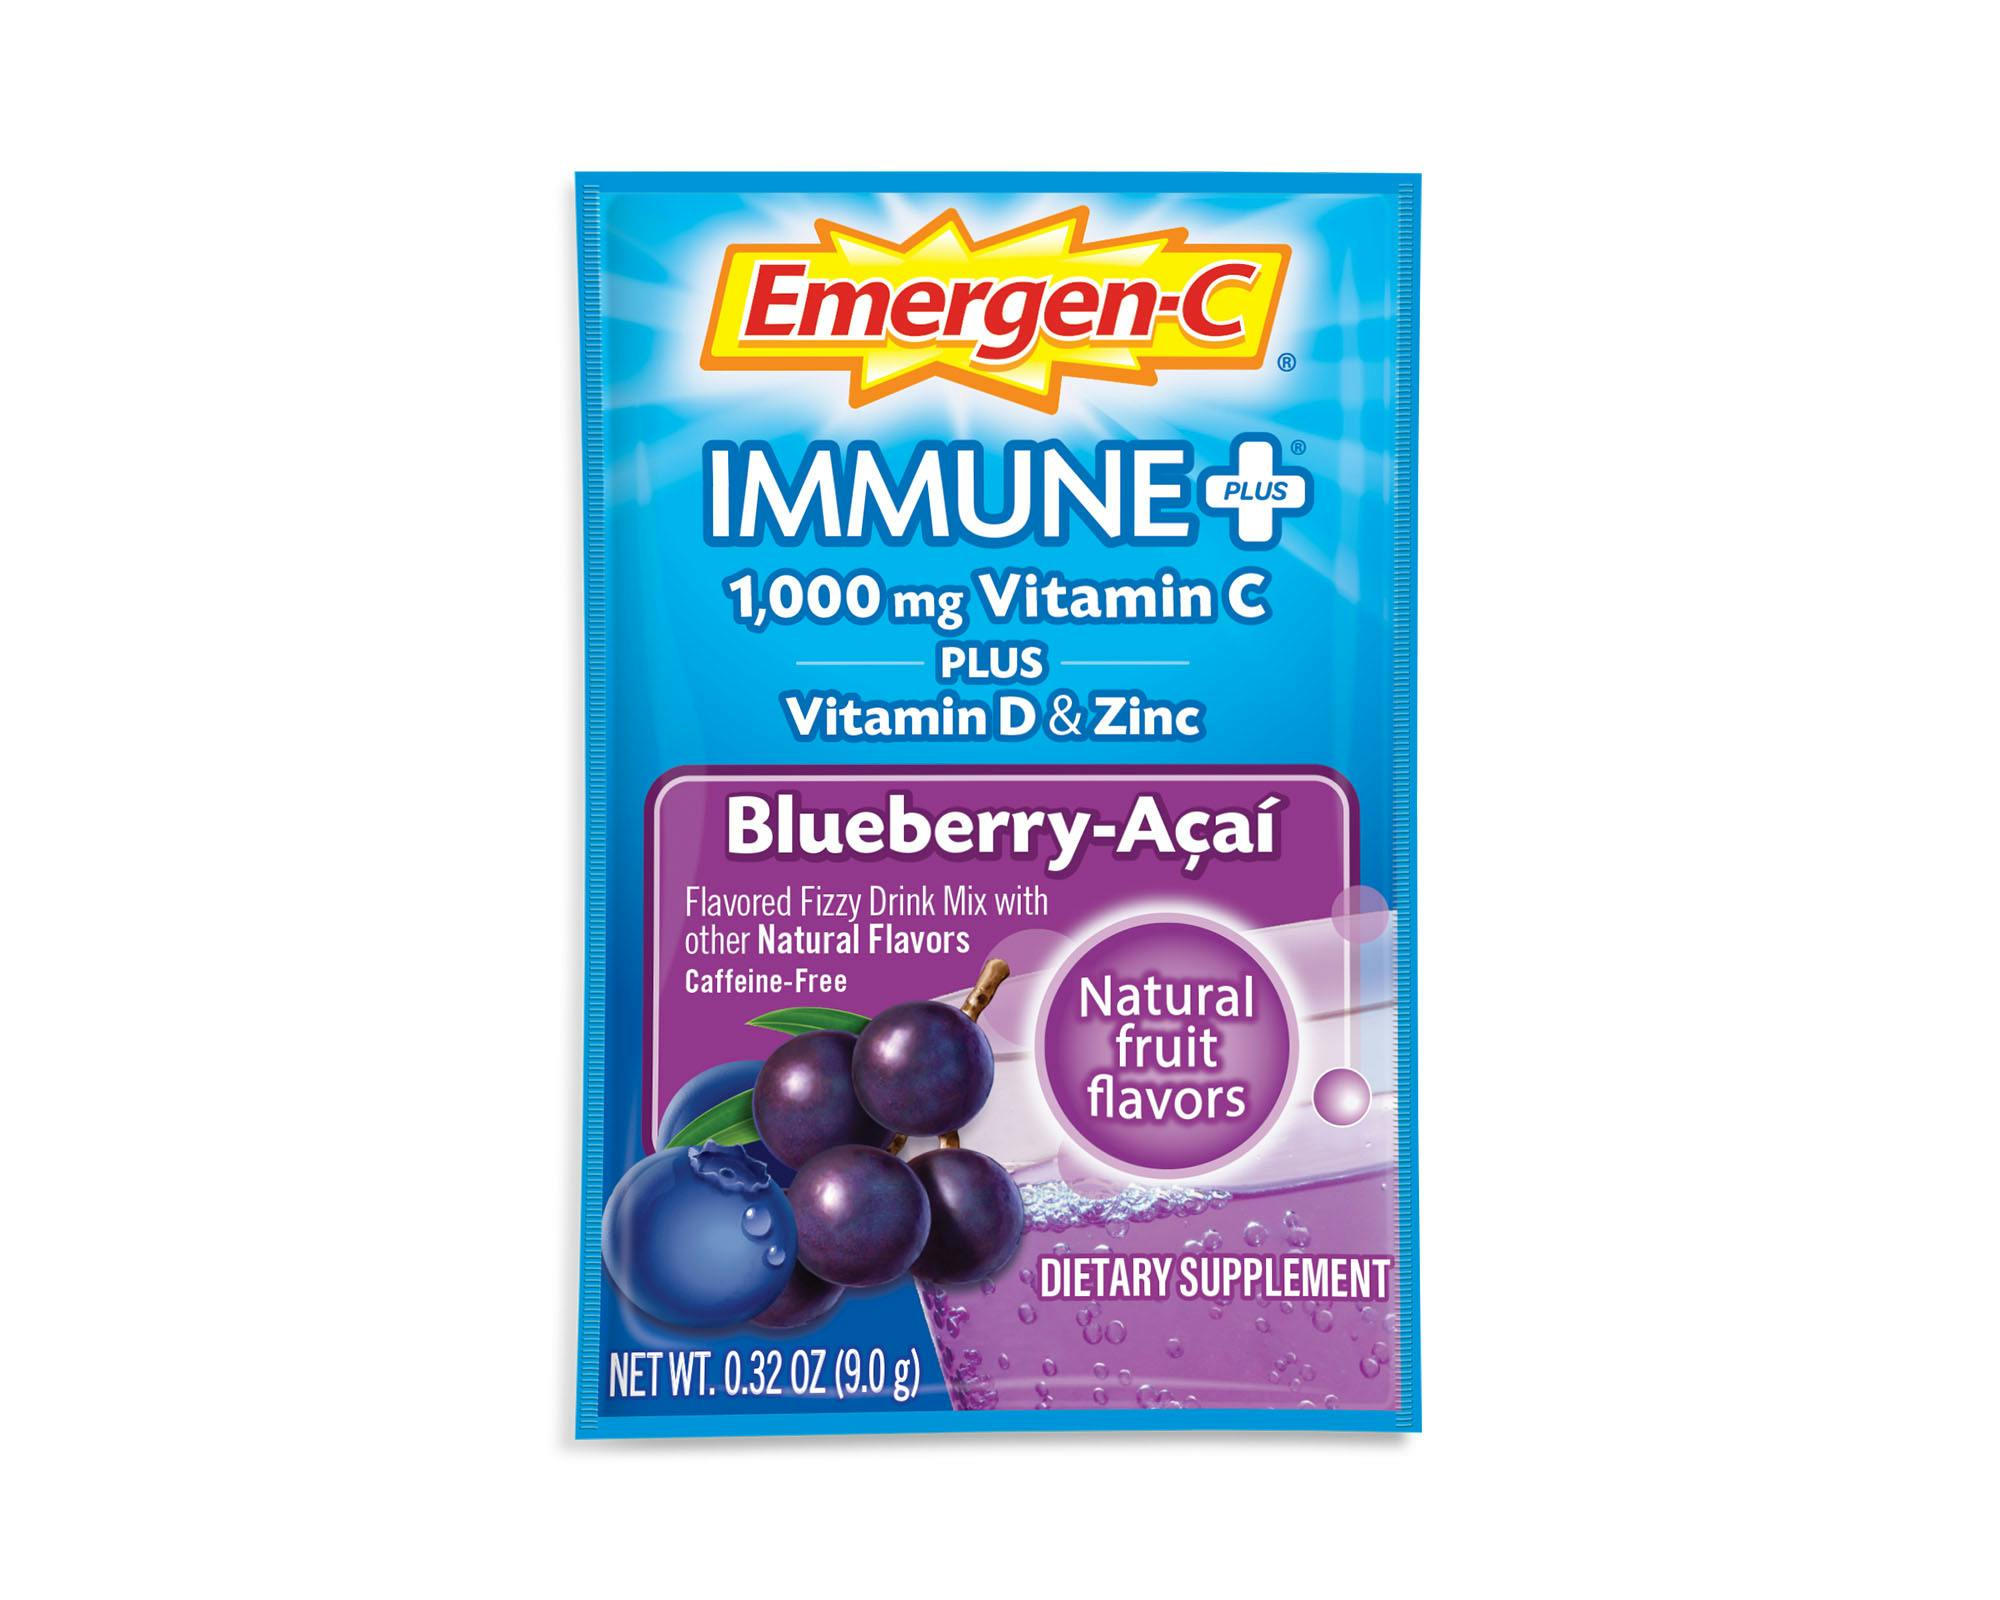 Blueberry-Acai Immune+ Support packet